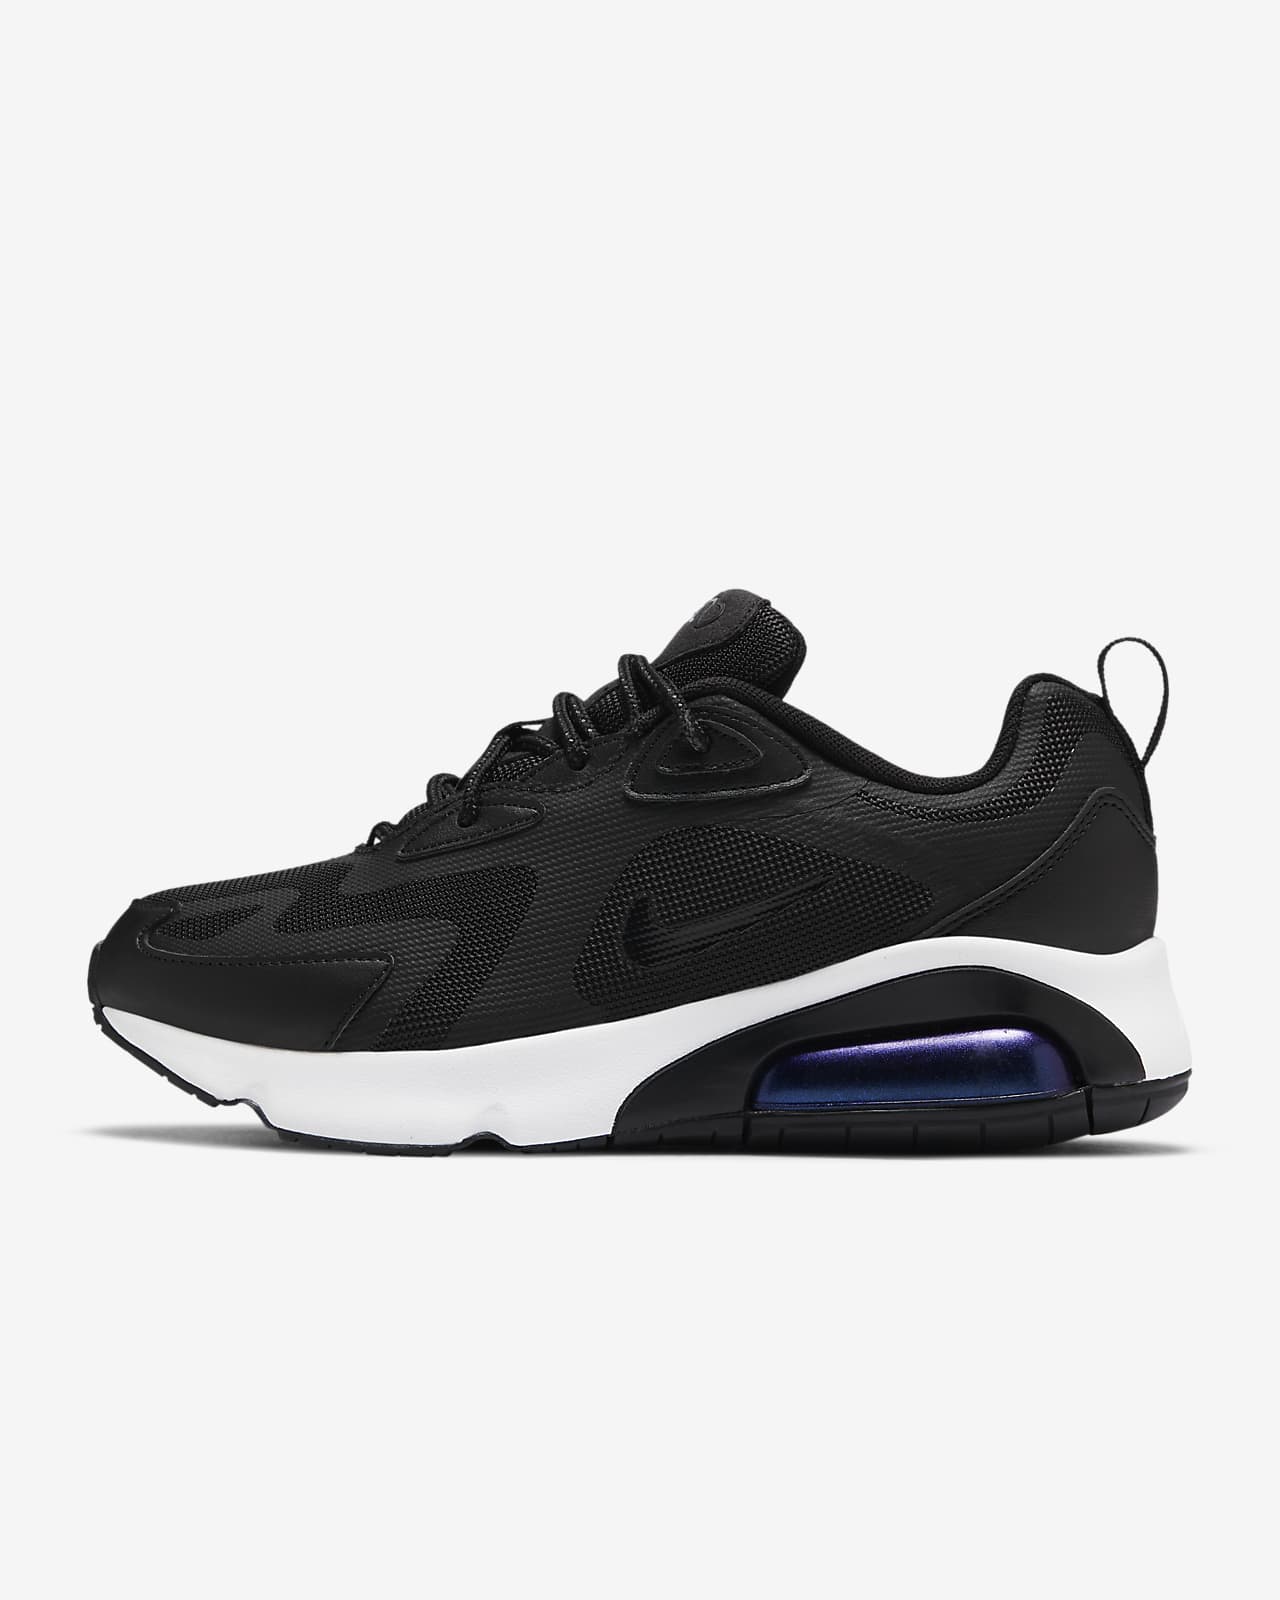 air max 200 women's black and white